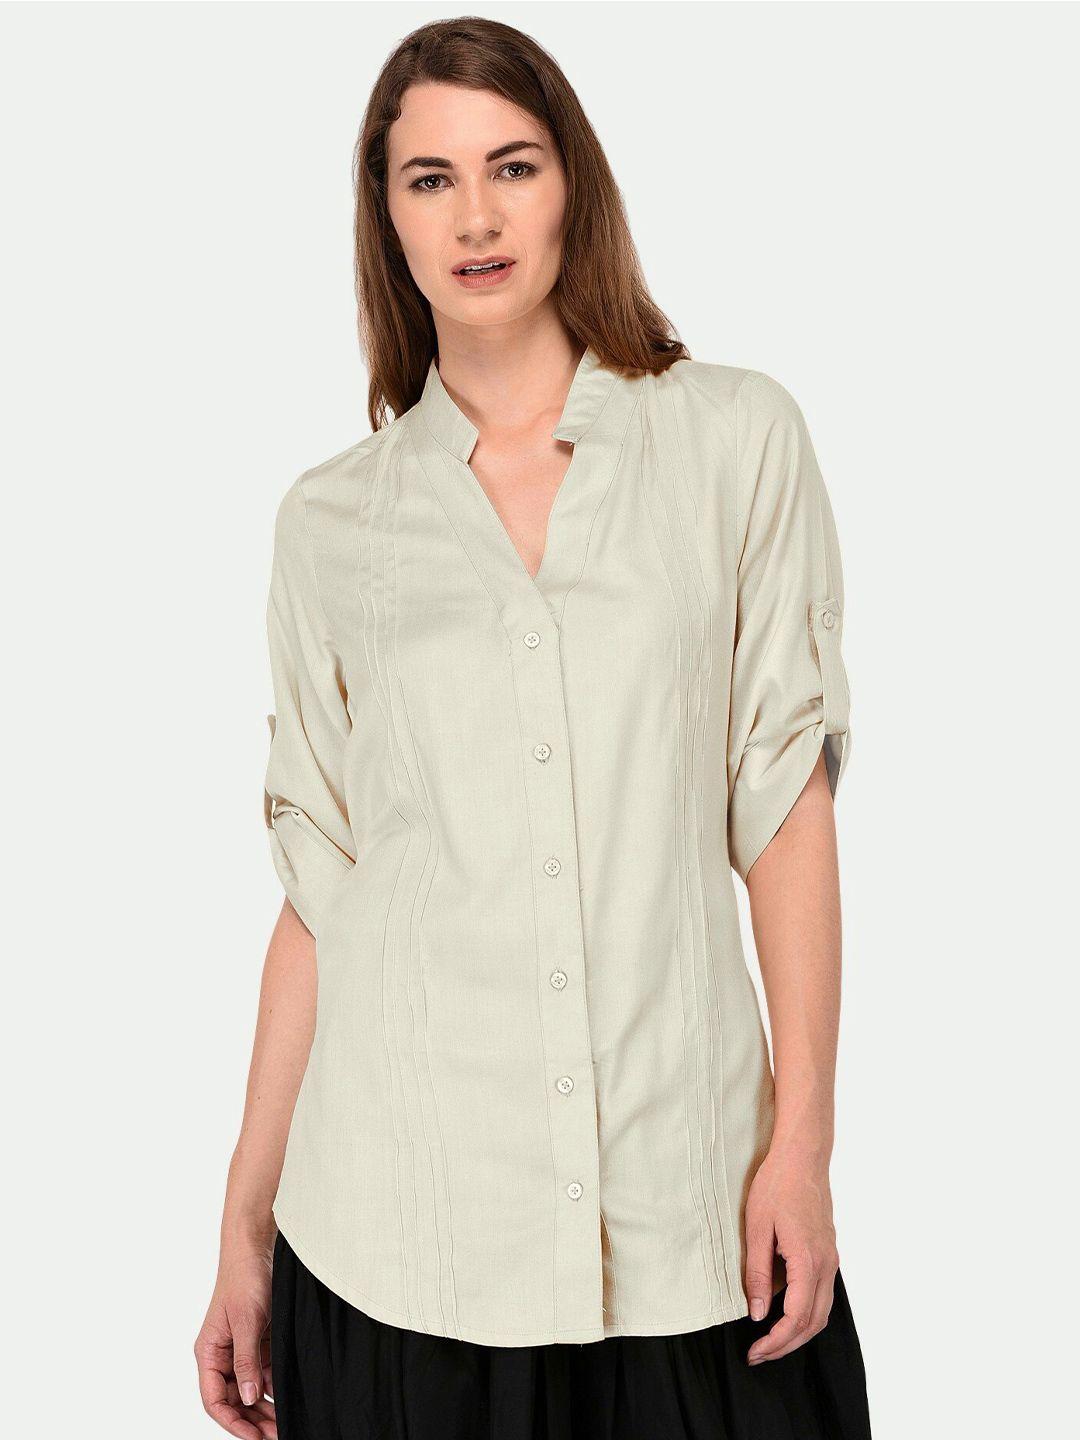 patrorna women off white comfort solid casual shirt